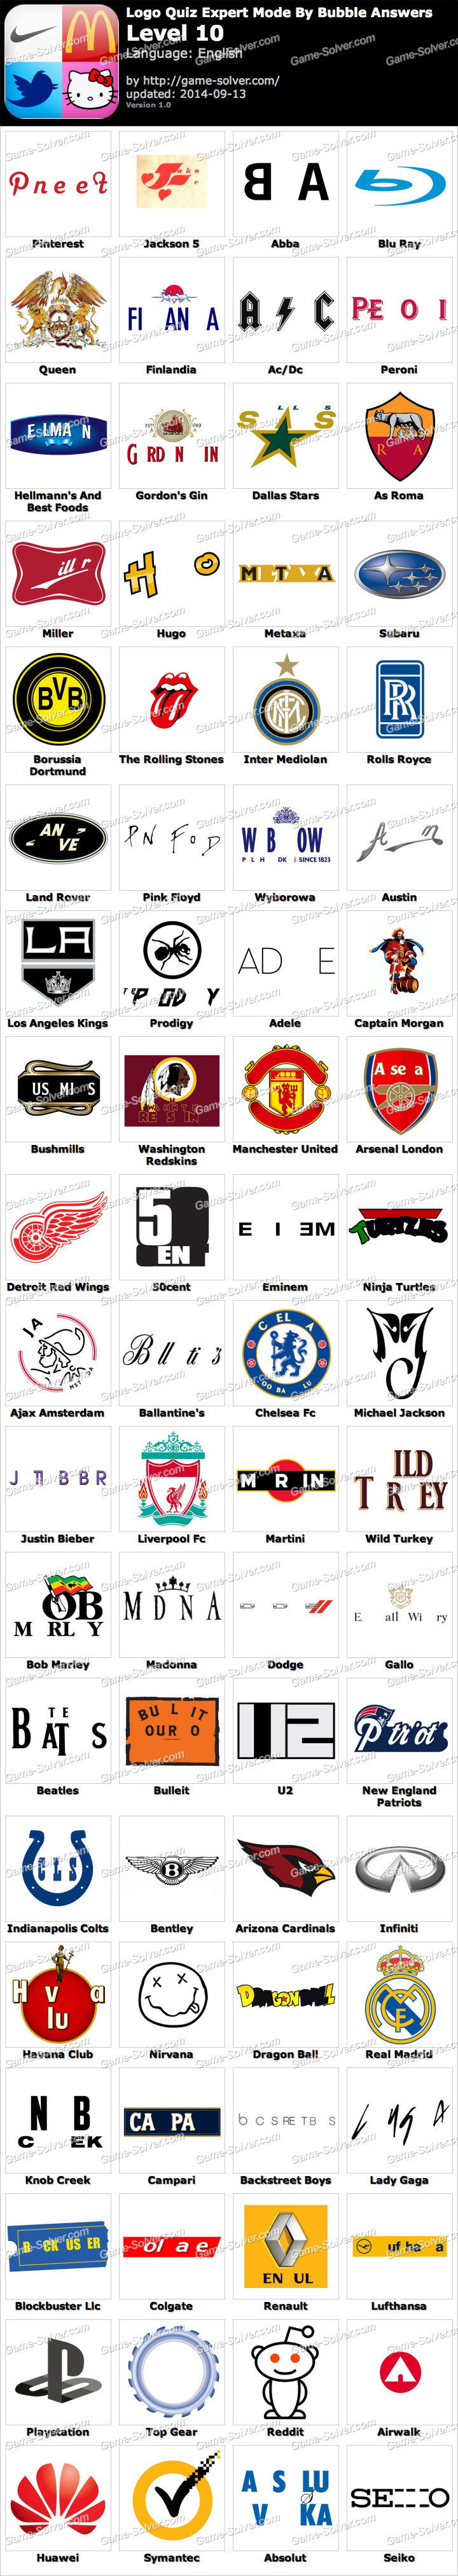 Can You Name These American Professional Sports Teams From A